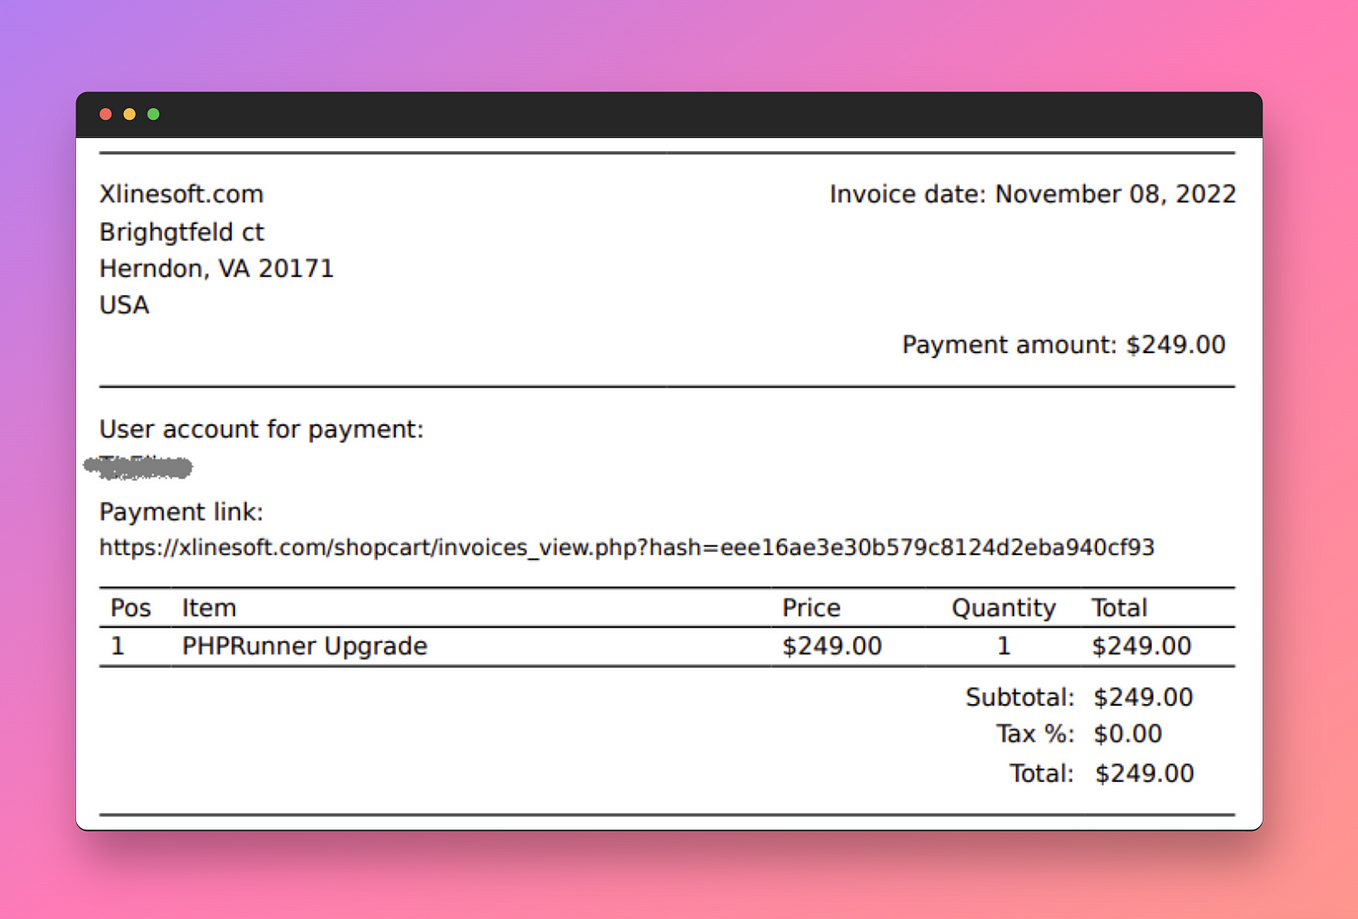 Generate PDF invoices using NodeJS and PDFMake